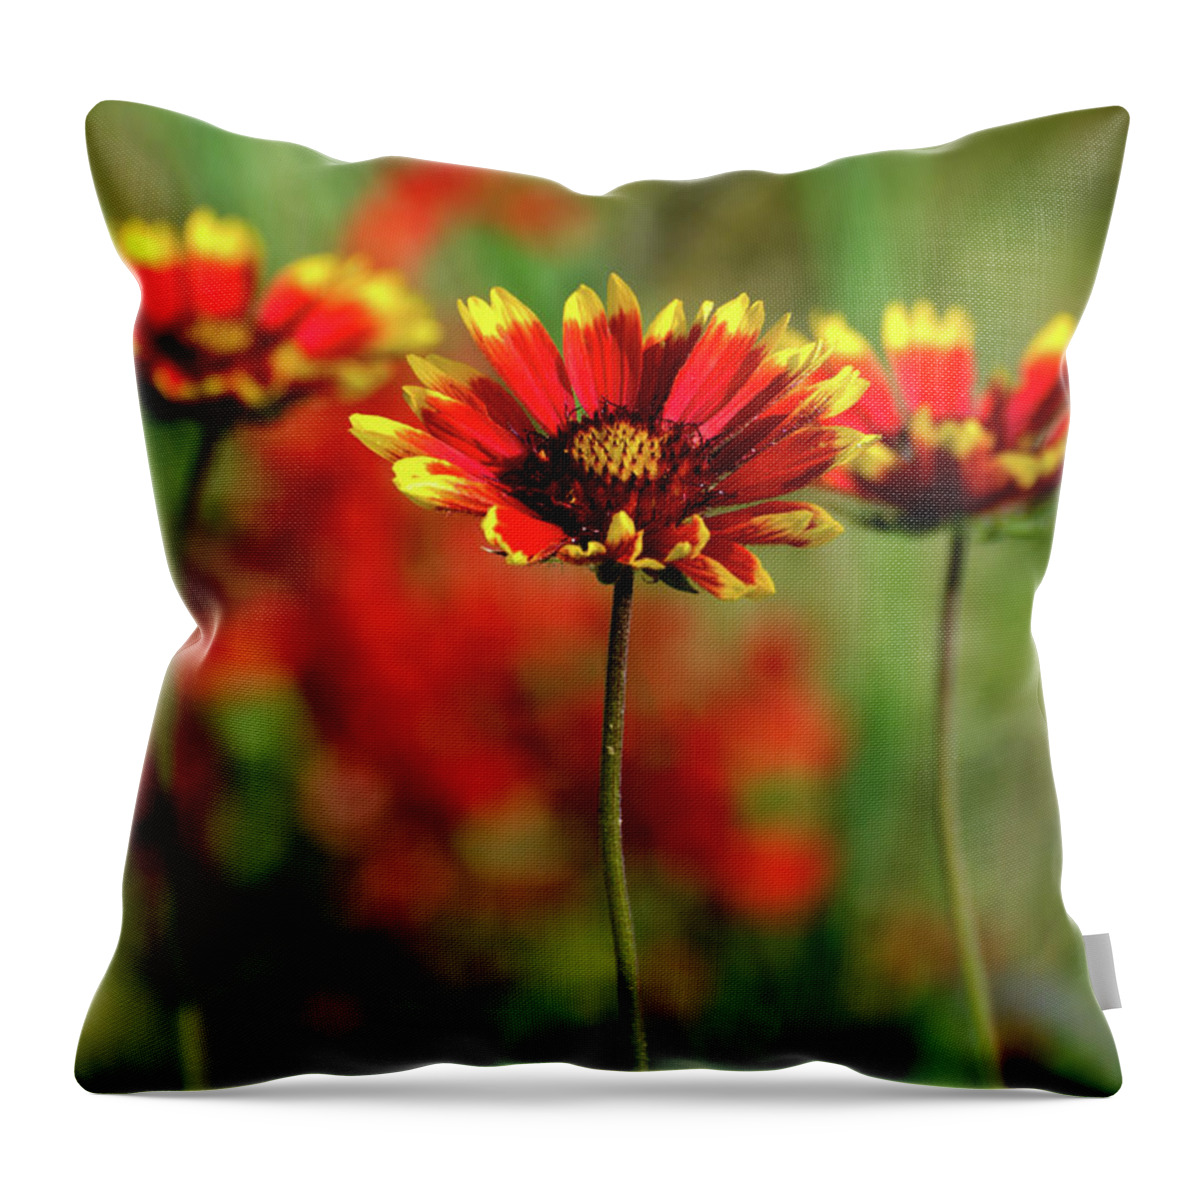 Nature Throw Pillow featuring the photograph Wildflowers by Linda Shannon Morgan